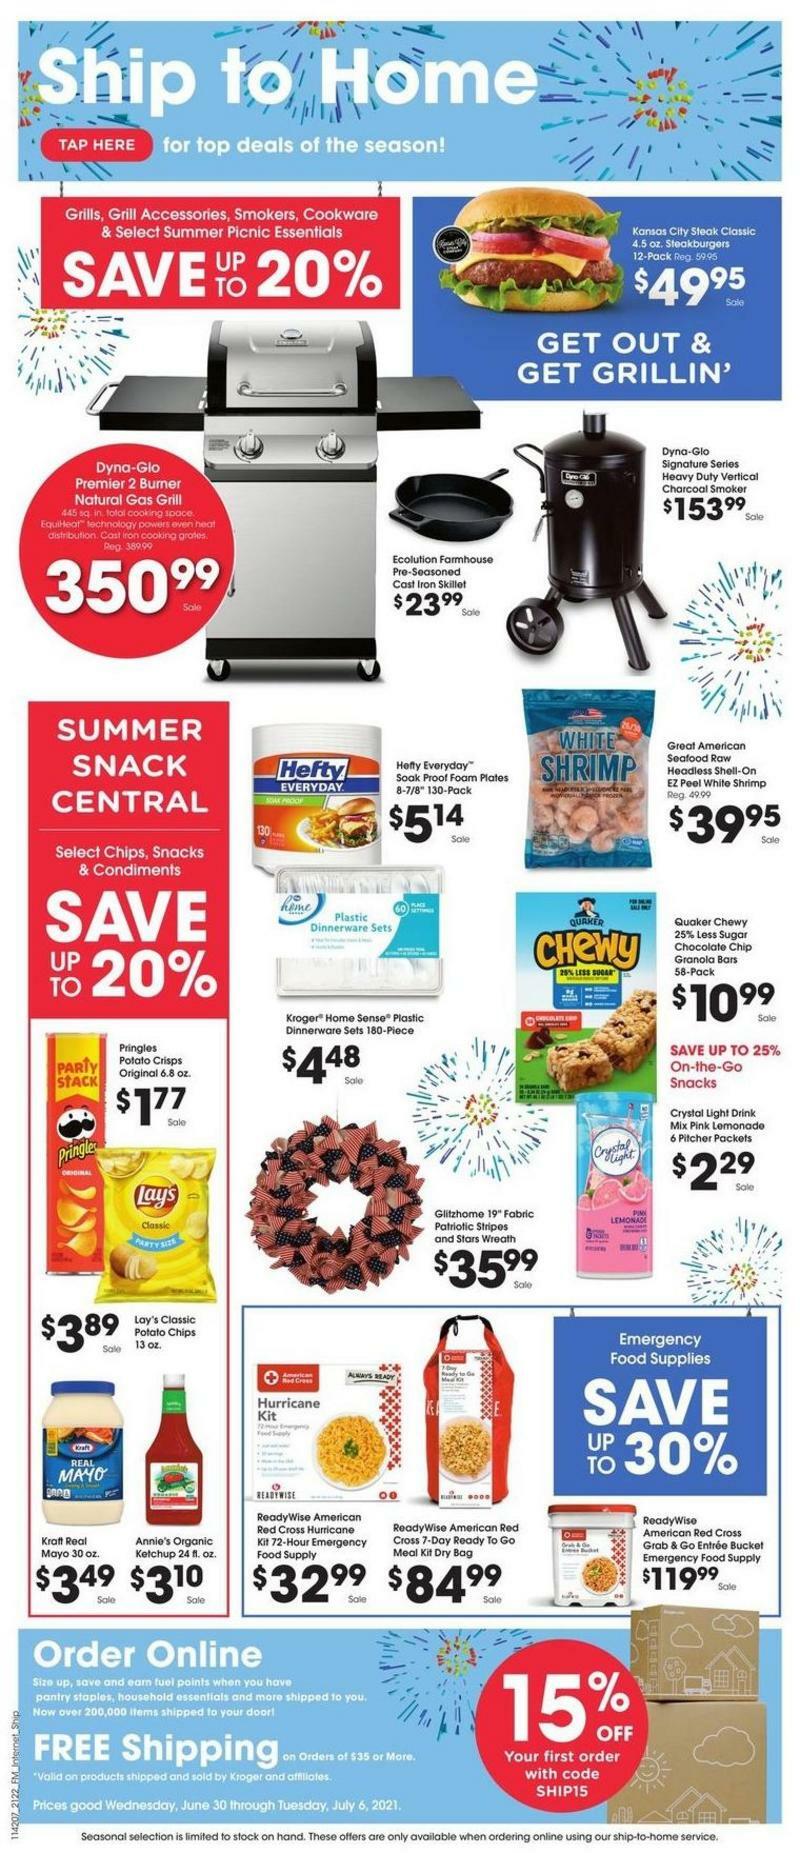 Kroger Ship to Home Weekly Ad from June 30